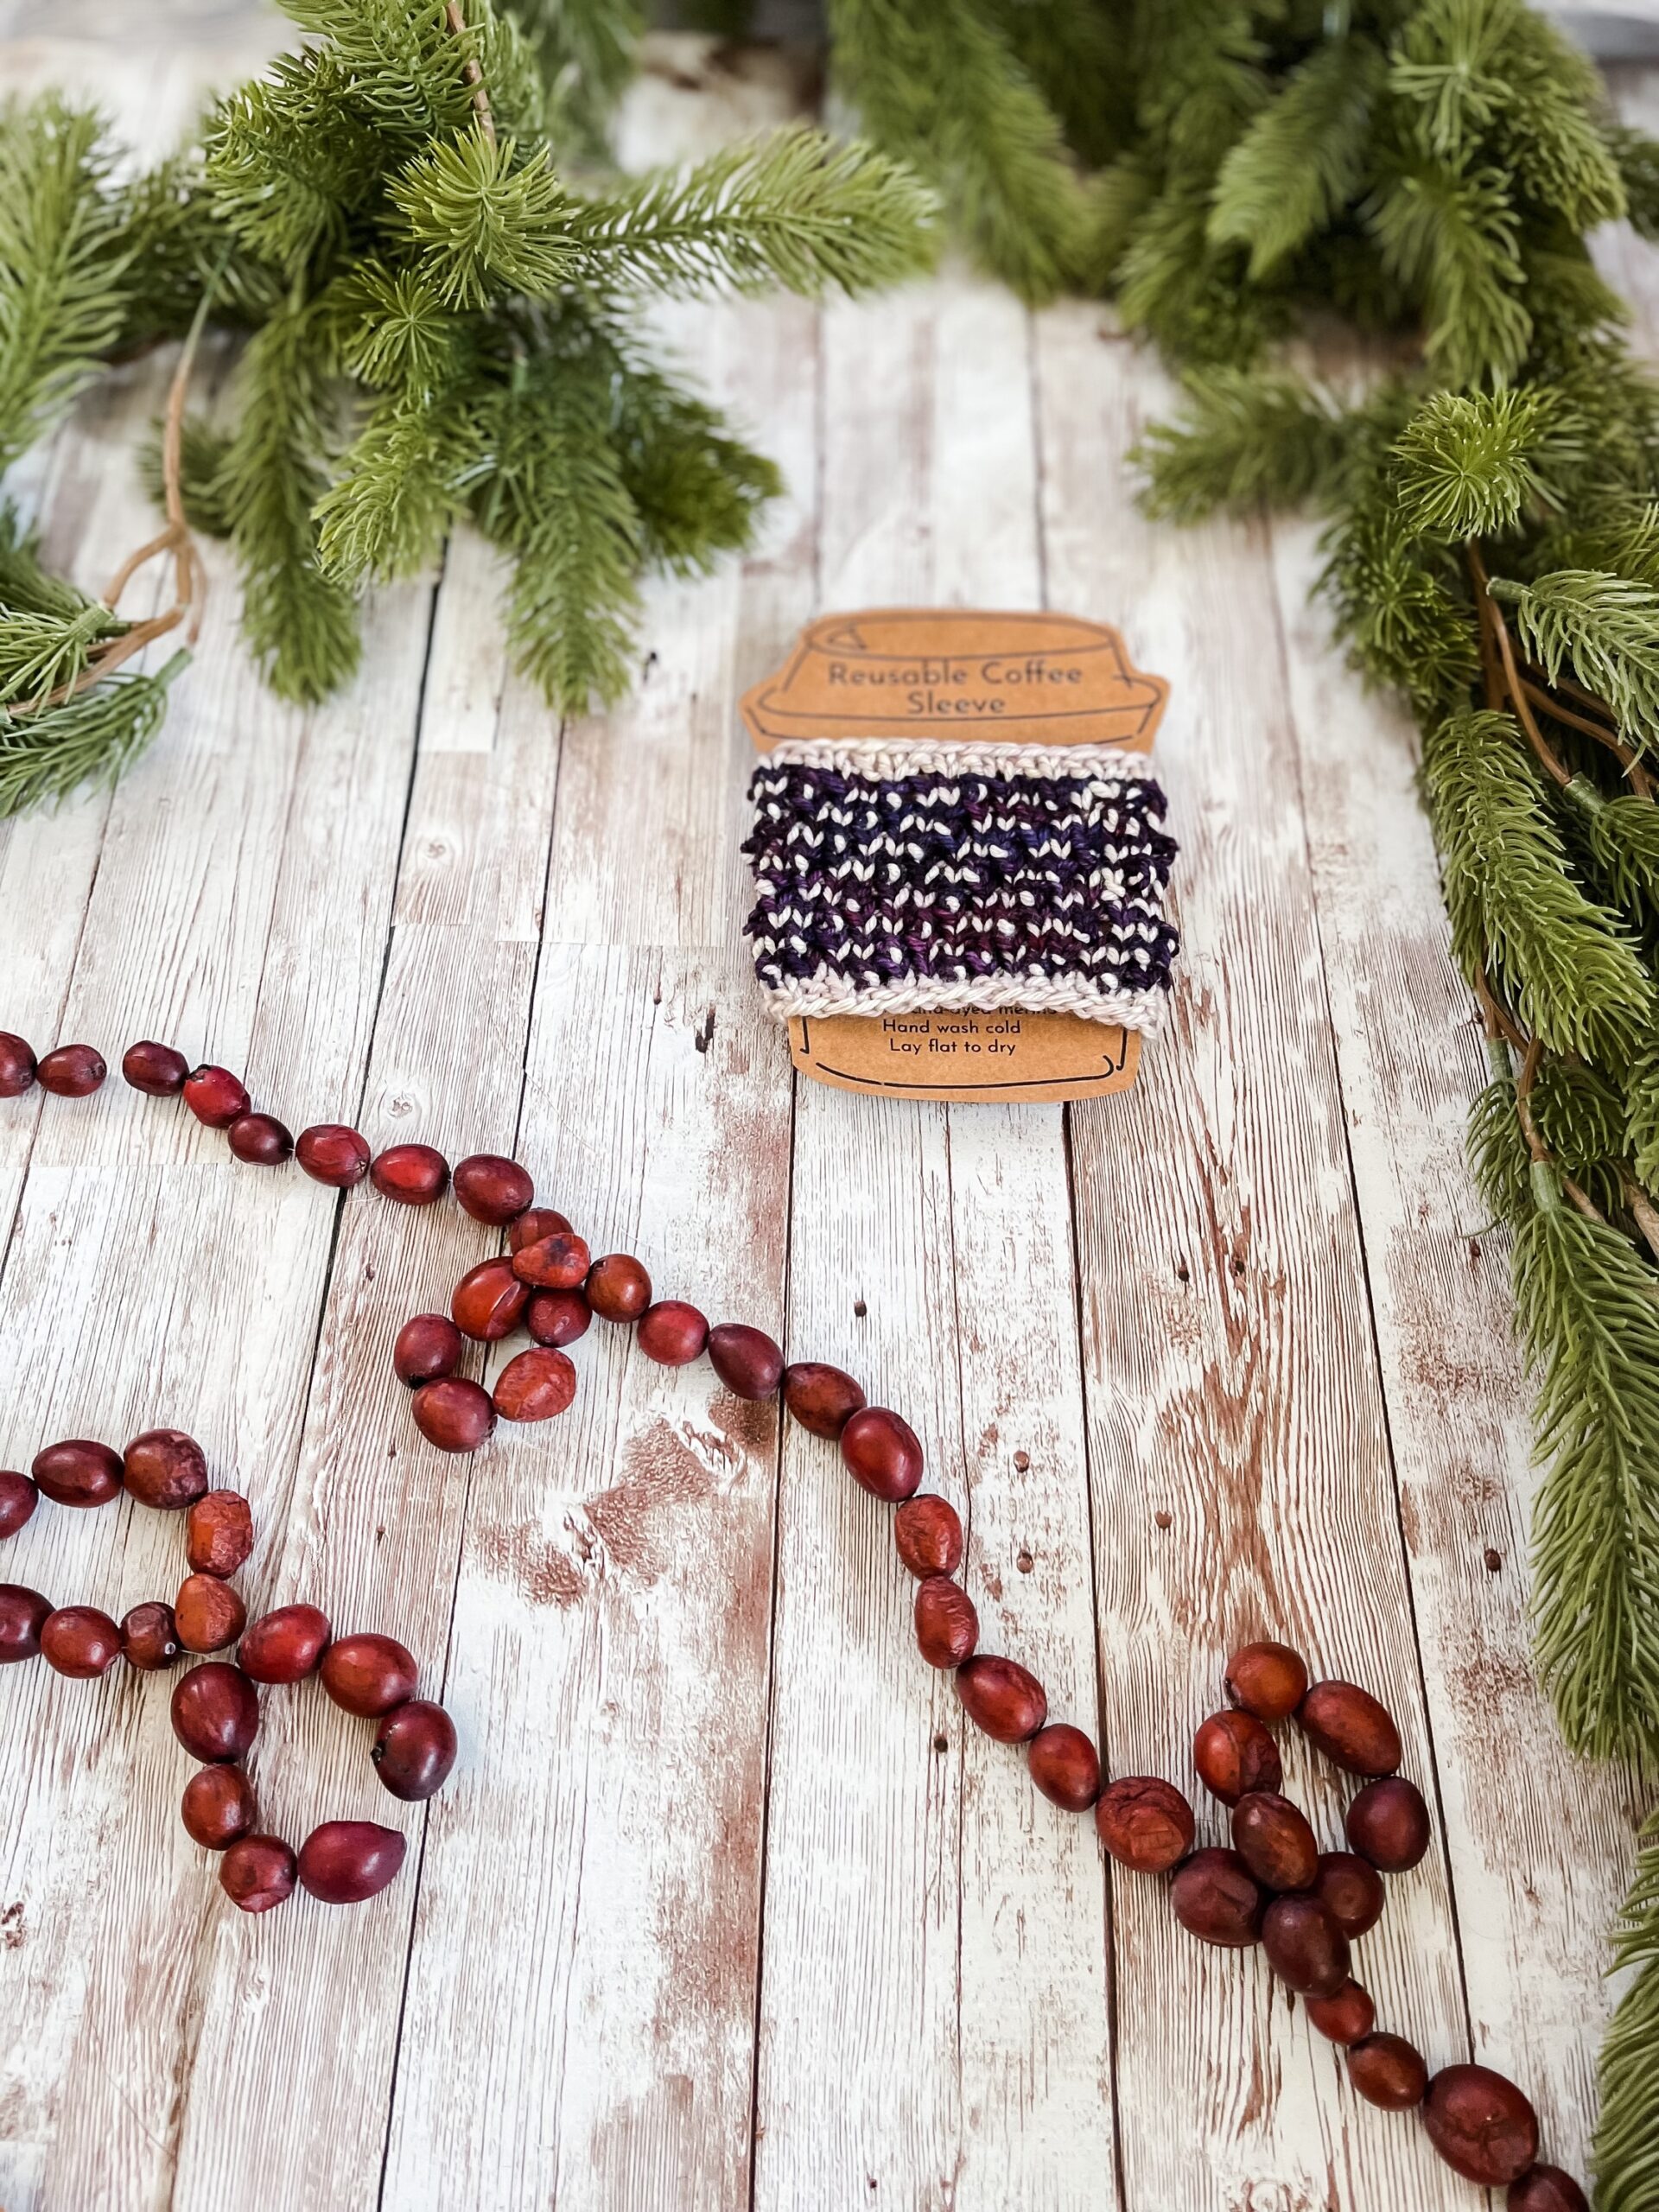 A purple and white coffee sleeve is wrapped around a kraft paper image of a coffee cup. It rests on a wood plank, surrounded by pine branches and a cranberry garland.